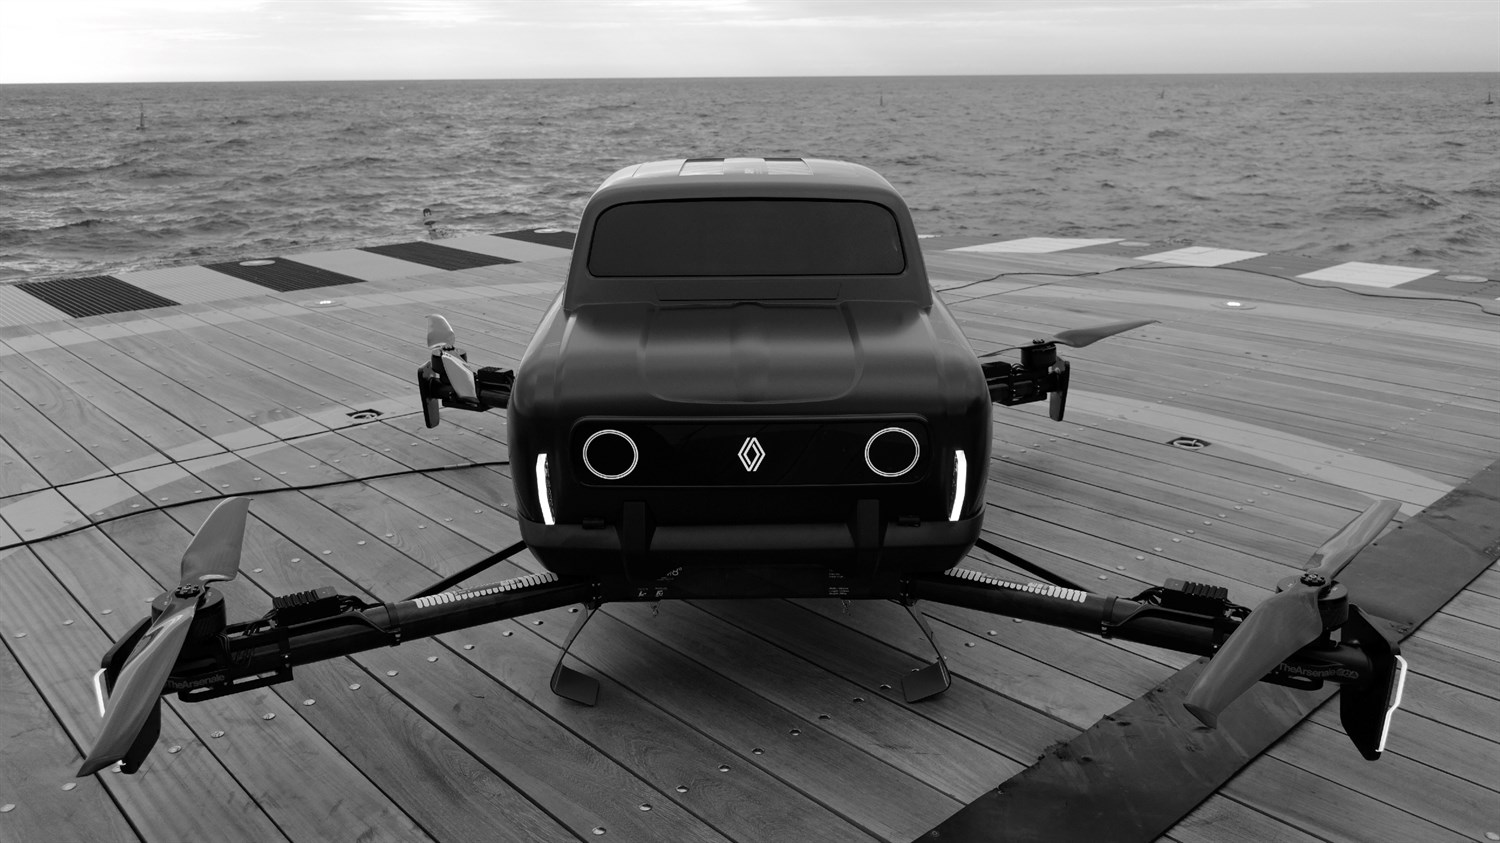 Renault and Thearsenale unveil AIR4: where we're going, we don't need roads